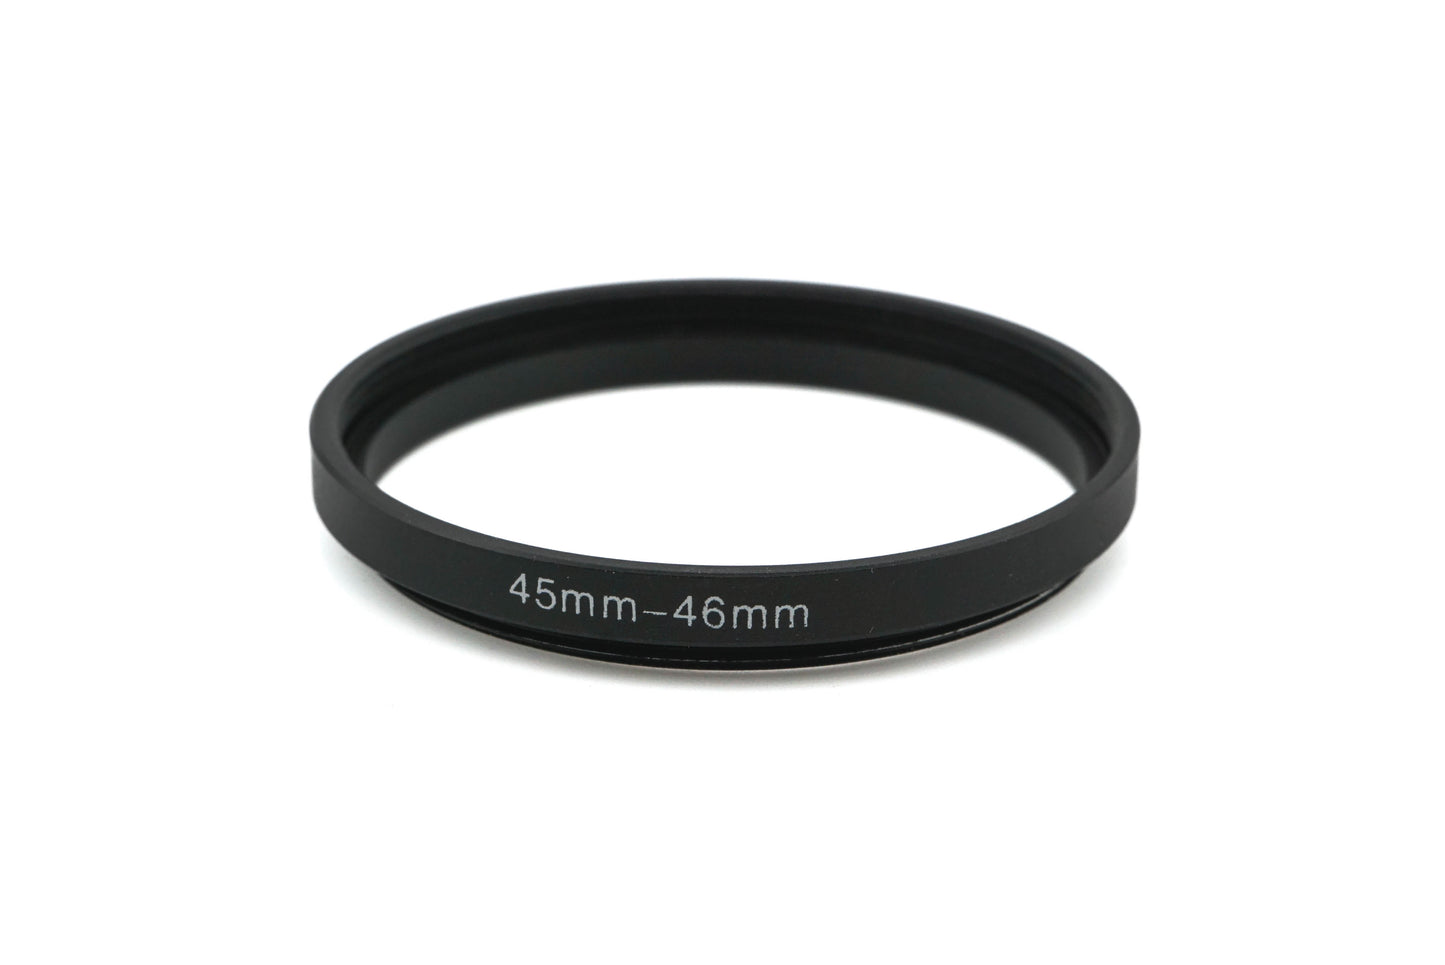 Generic 45mm - 46mm Step-Up Ring